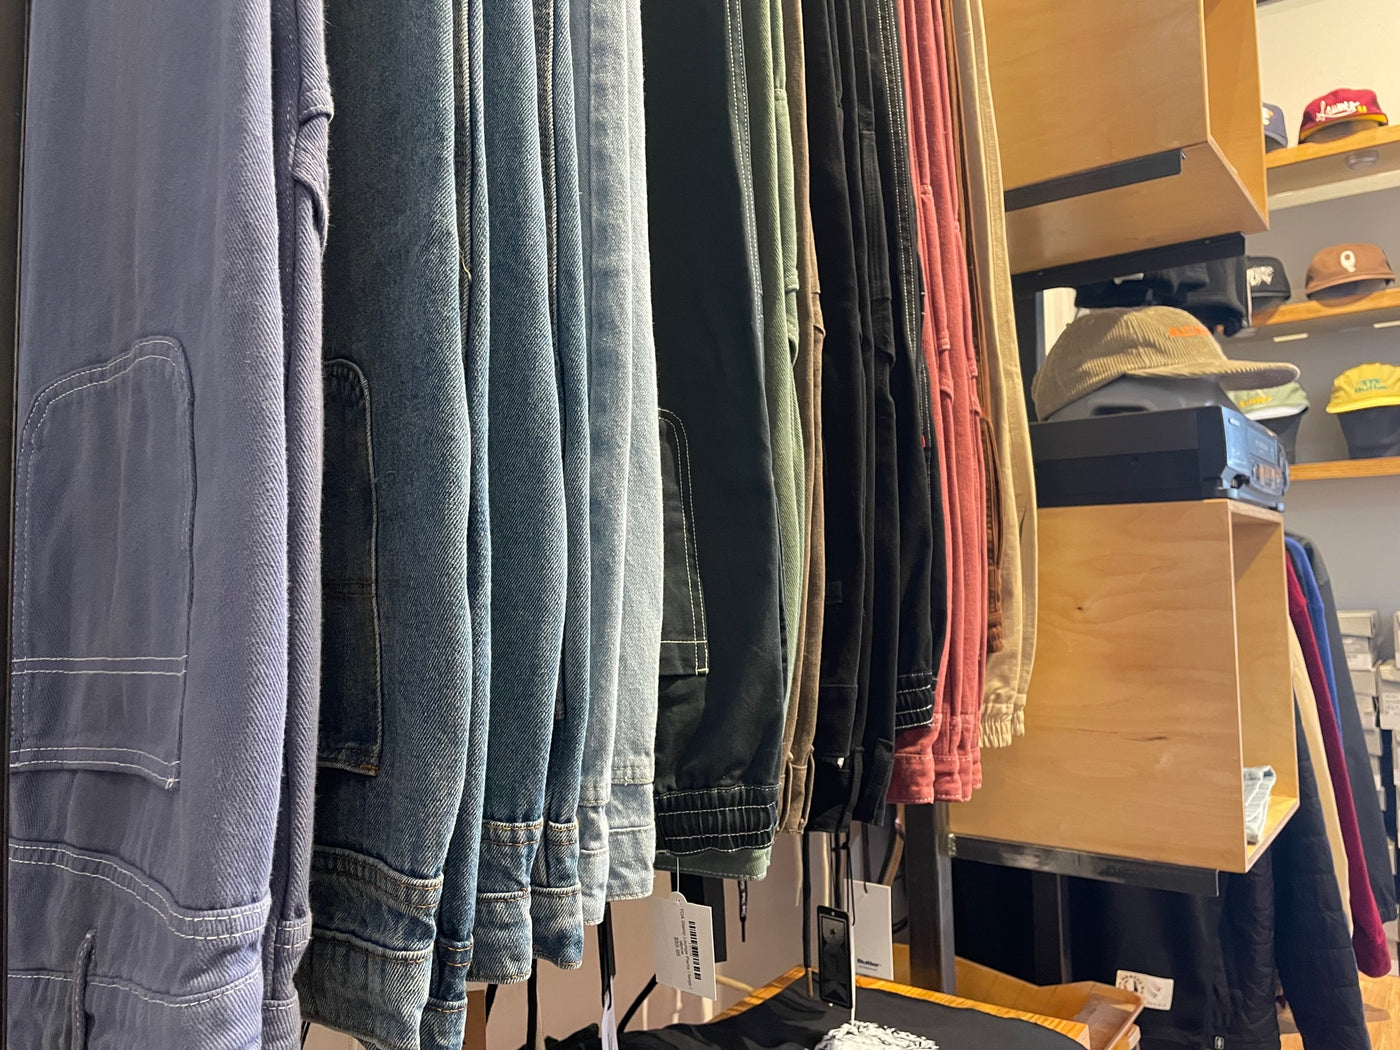 We carry various brands of pants & jeans including Butter goods, WKND, Quasi, and Theories of Atlantis. Come in our shop located in Charlottesville, Virginia for more!